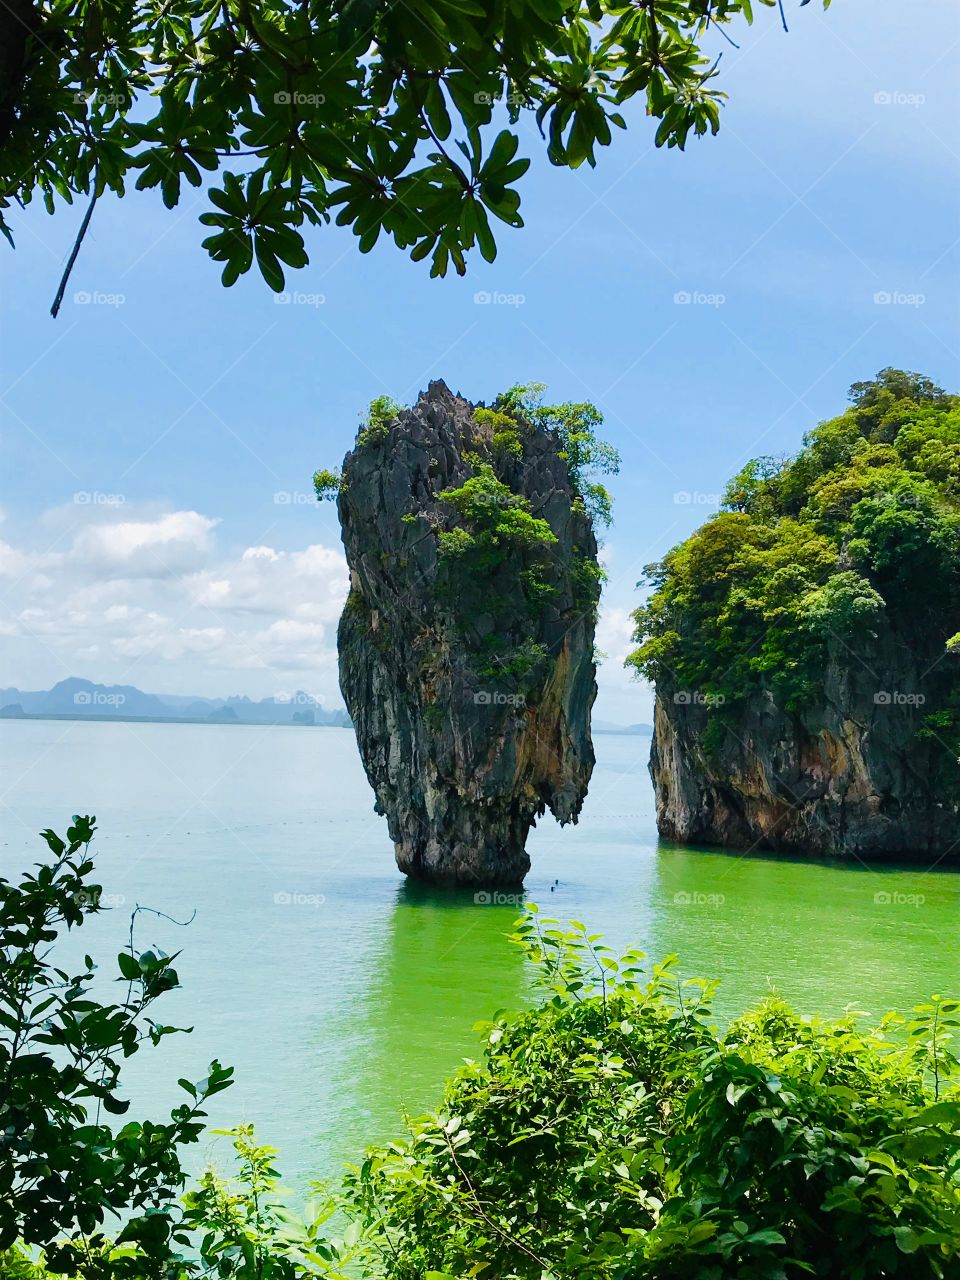 James Bond Island In Southern Thailand